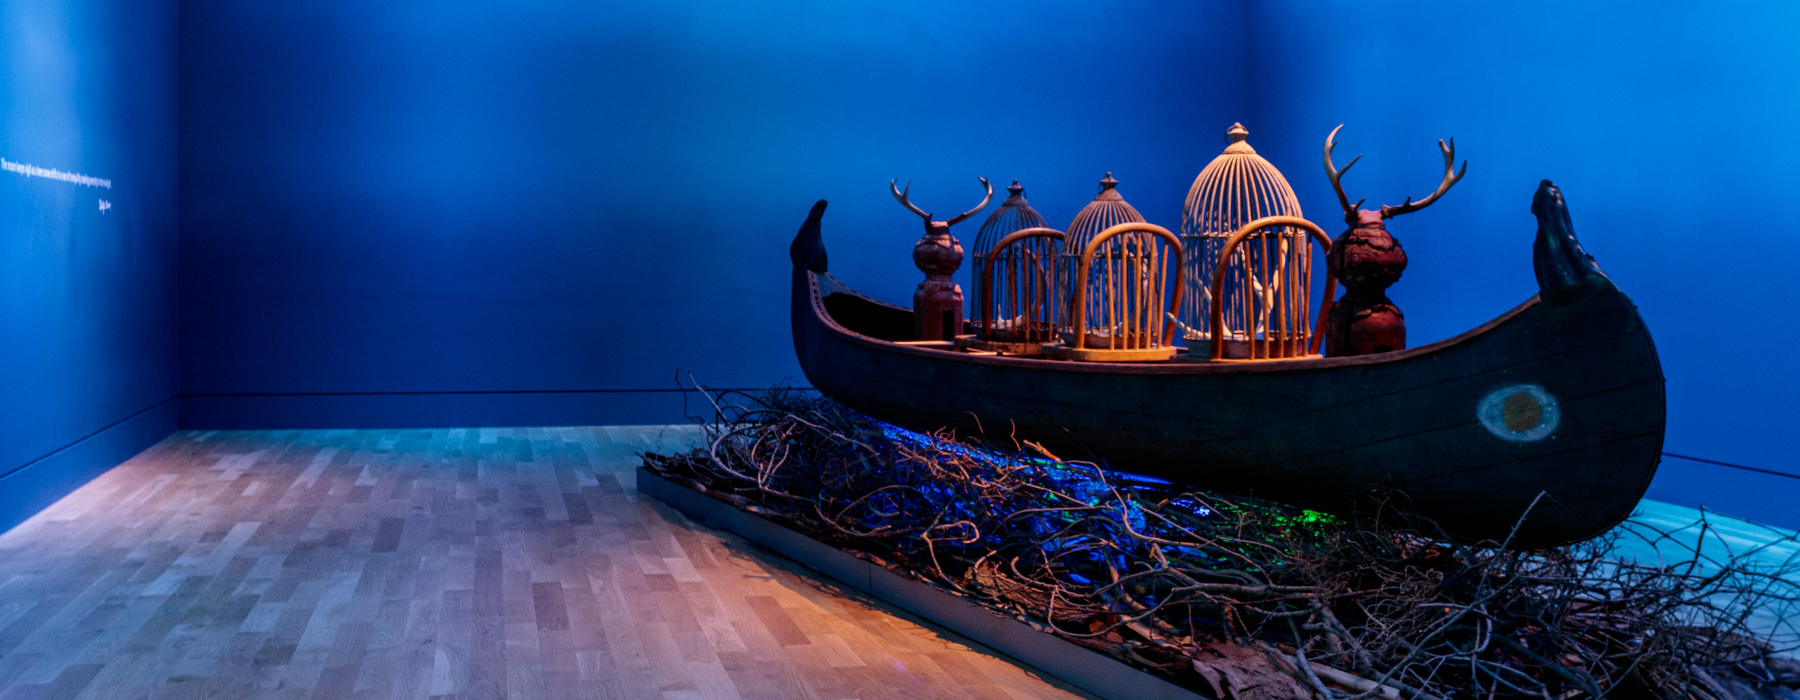 A canoe with wooden objects inside floats over a bed of dry branches in a blue room.